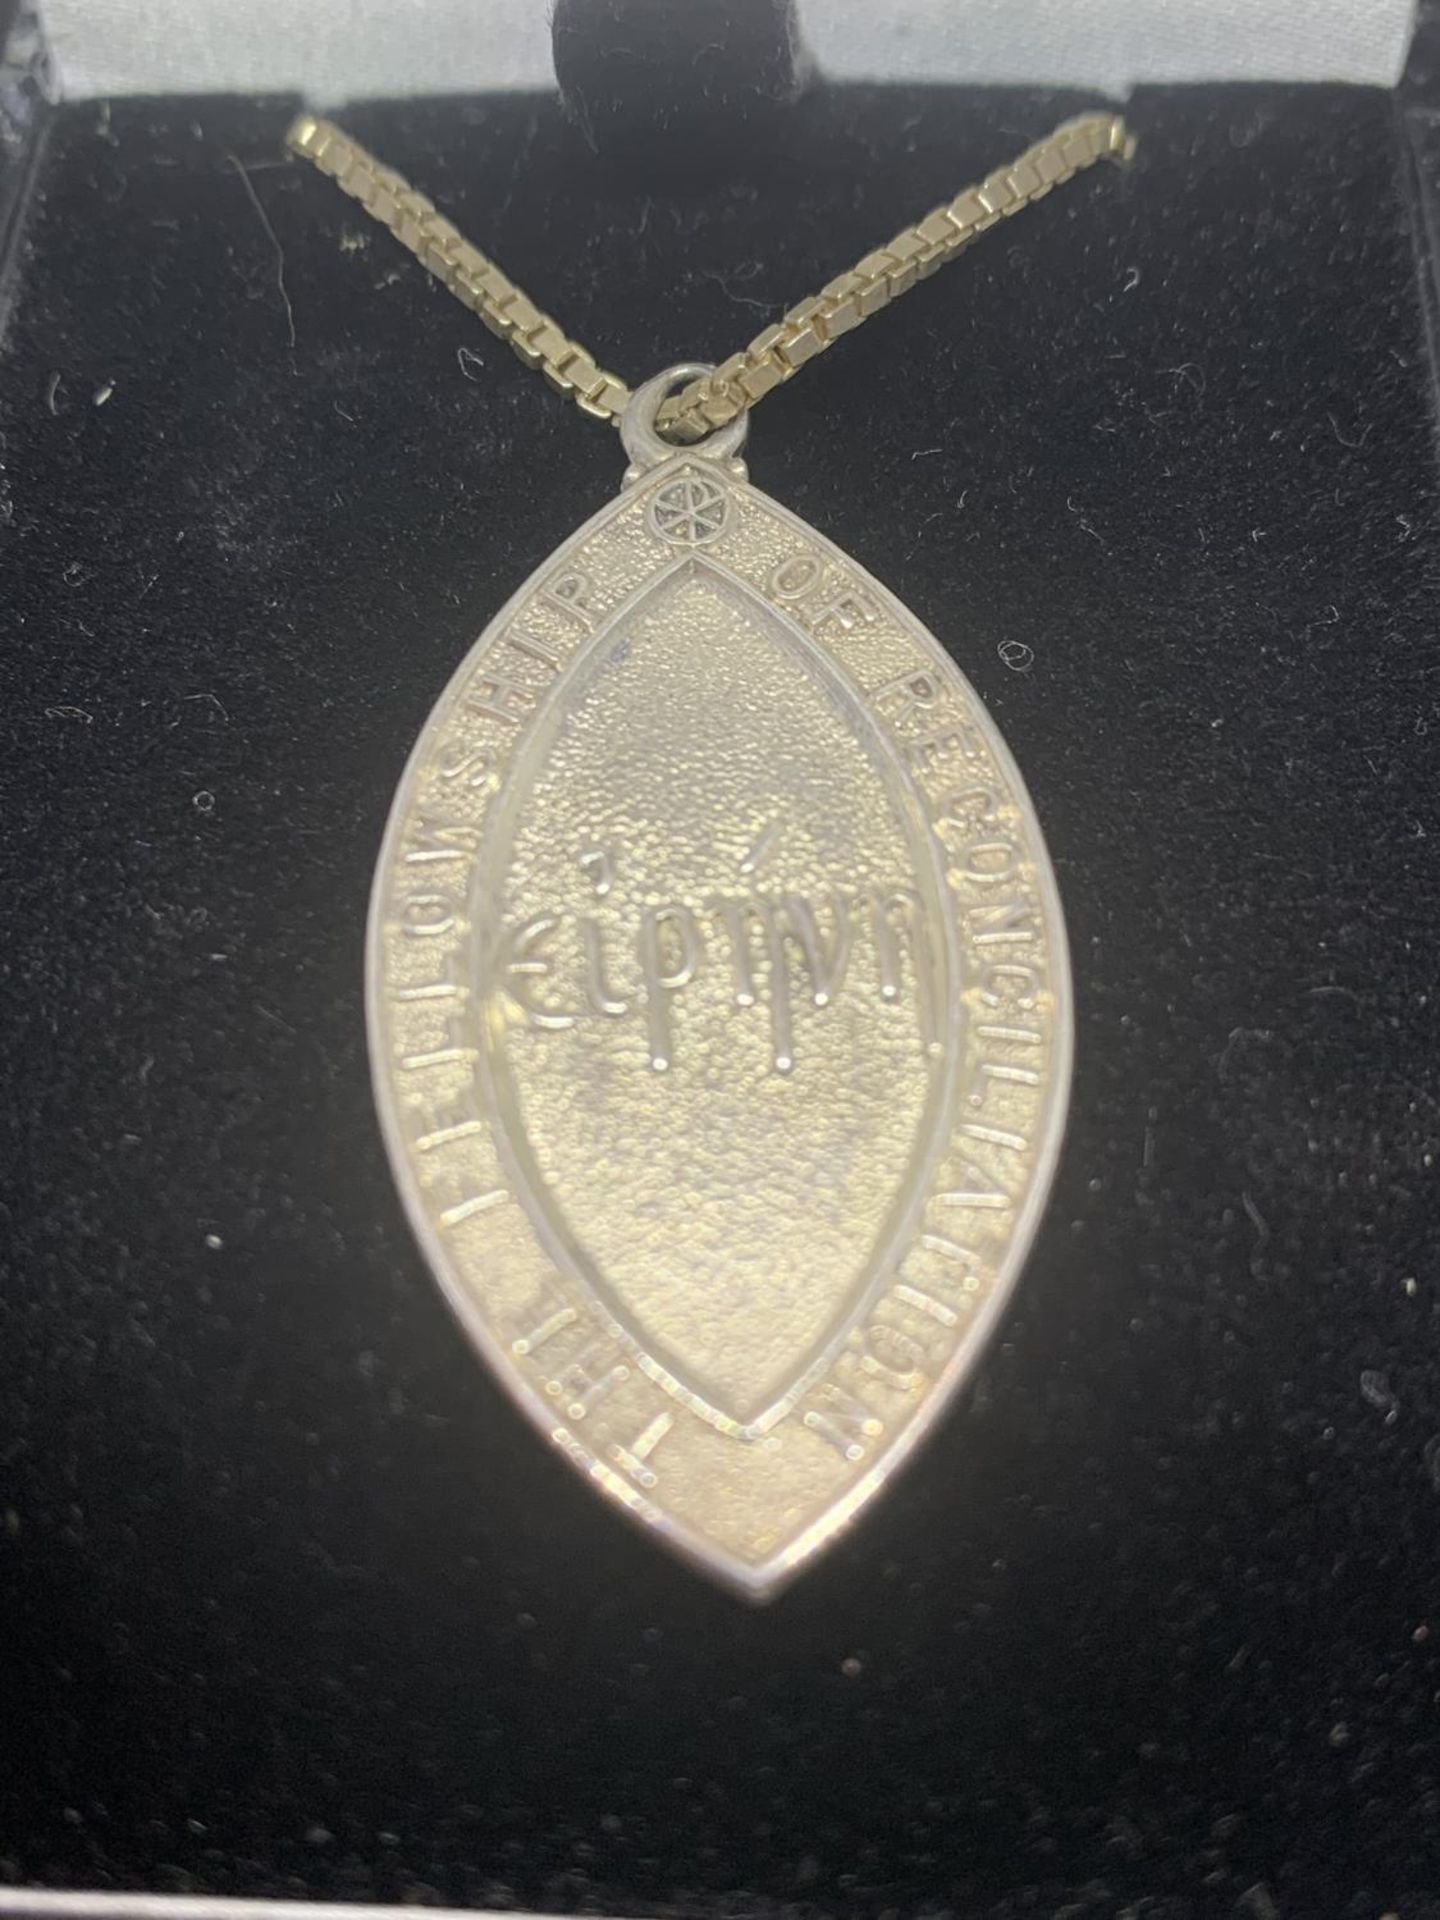 A SILVER NECKLACE WITH A FELLOWSHIP OF RECONCILIATION PENDANT IN A PRESENTATION BOX - Image 2 of 3